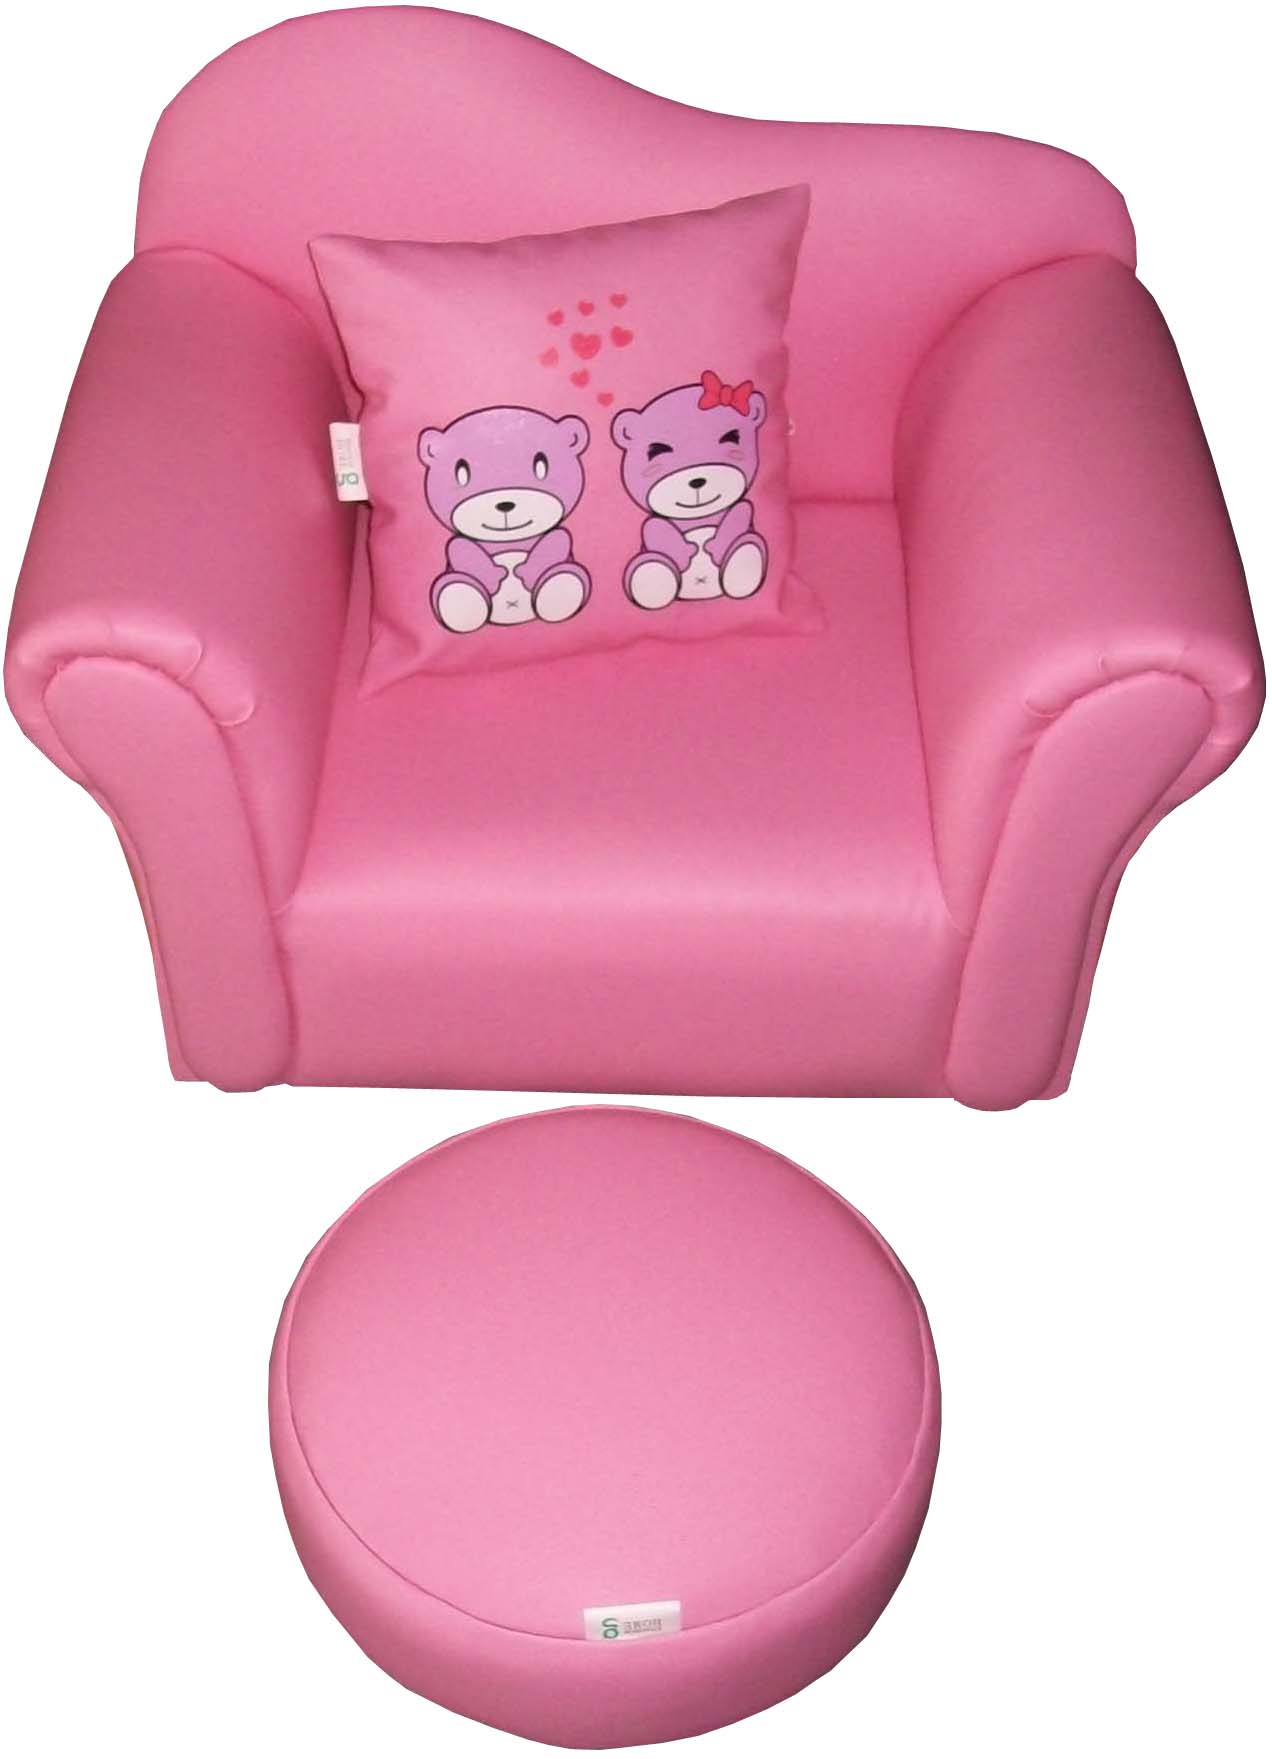 Child's Single Chair with Cushion & Stool